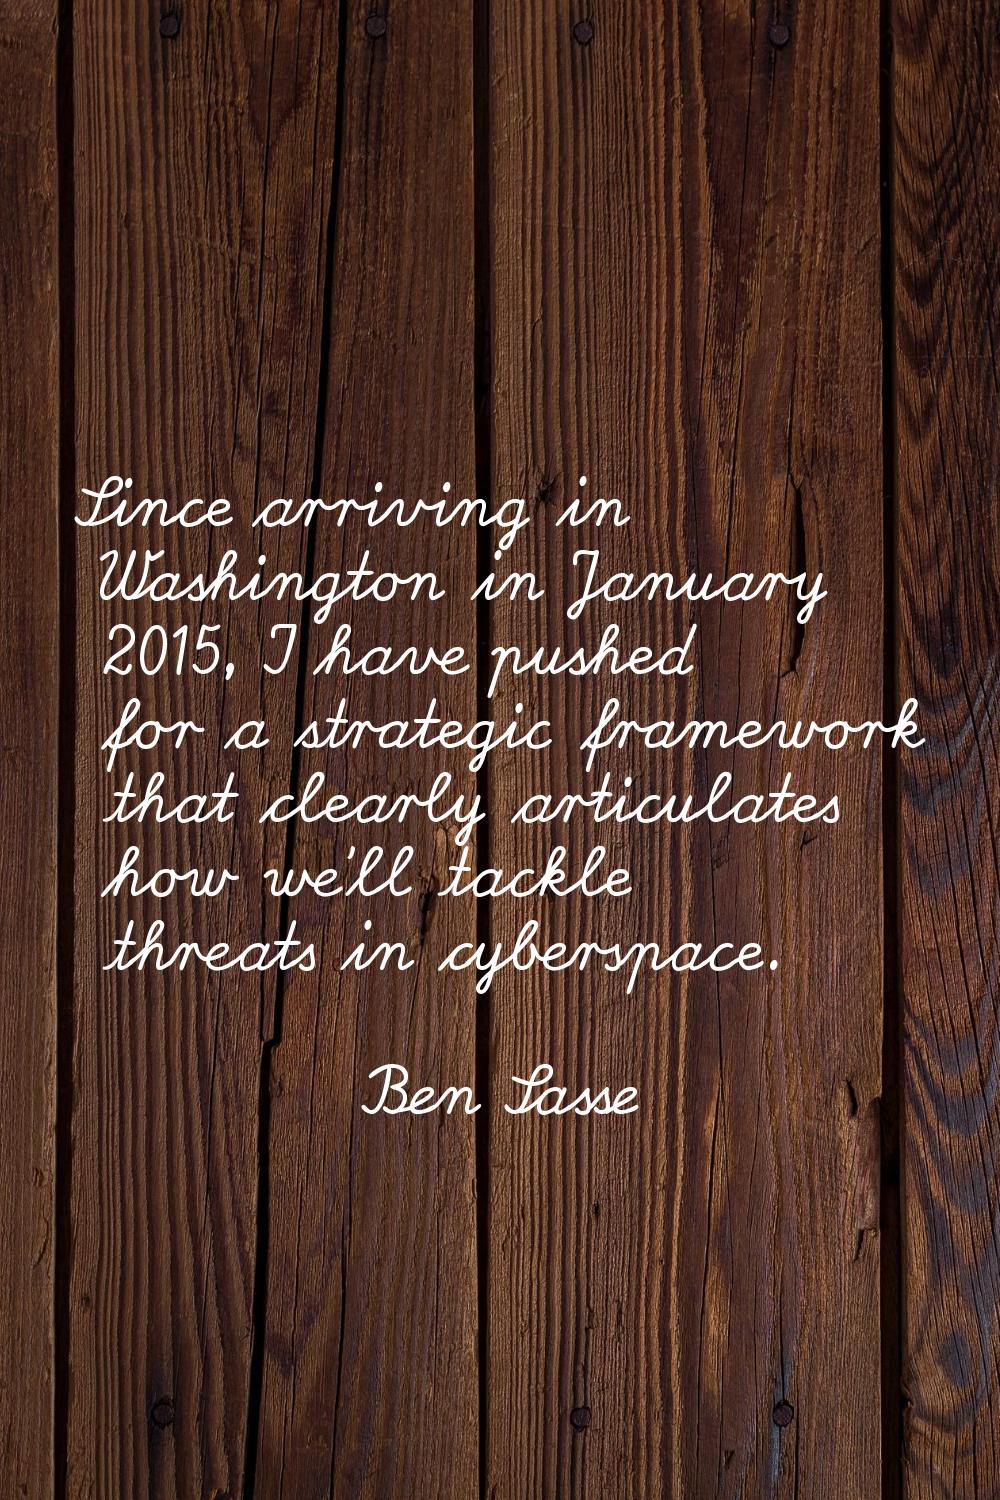 Since arriving in Washington in January 2015, I have pushed for a strategic framework that clearly 